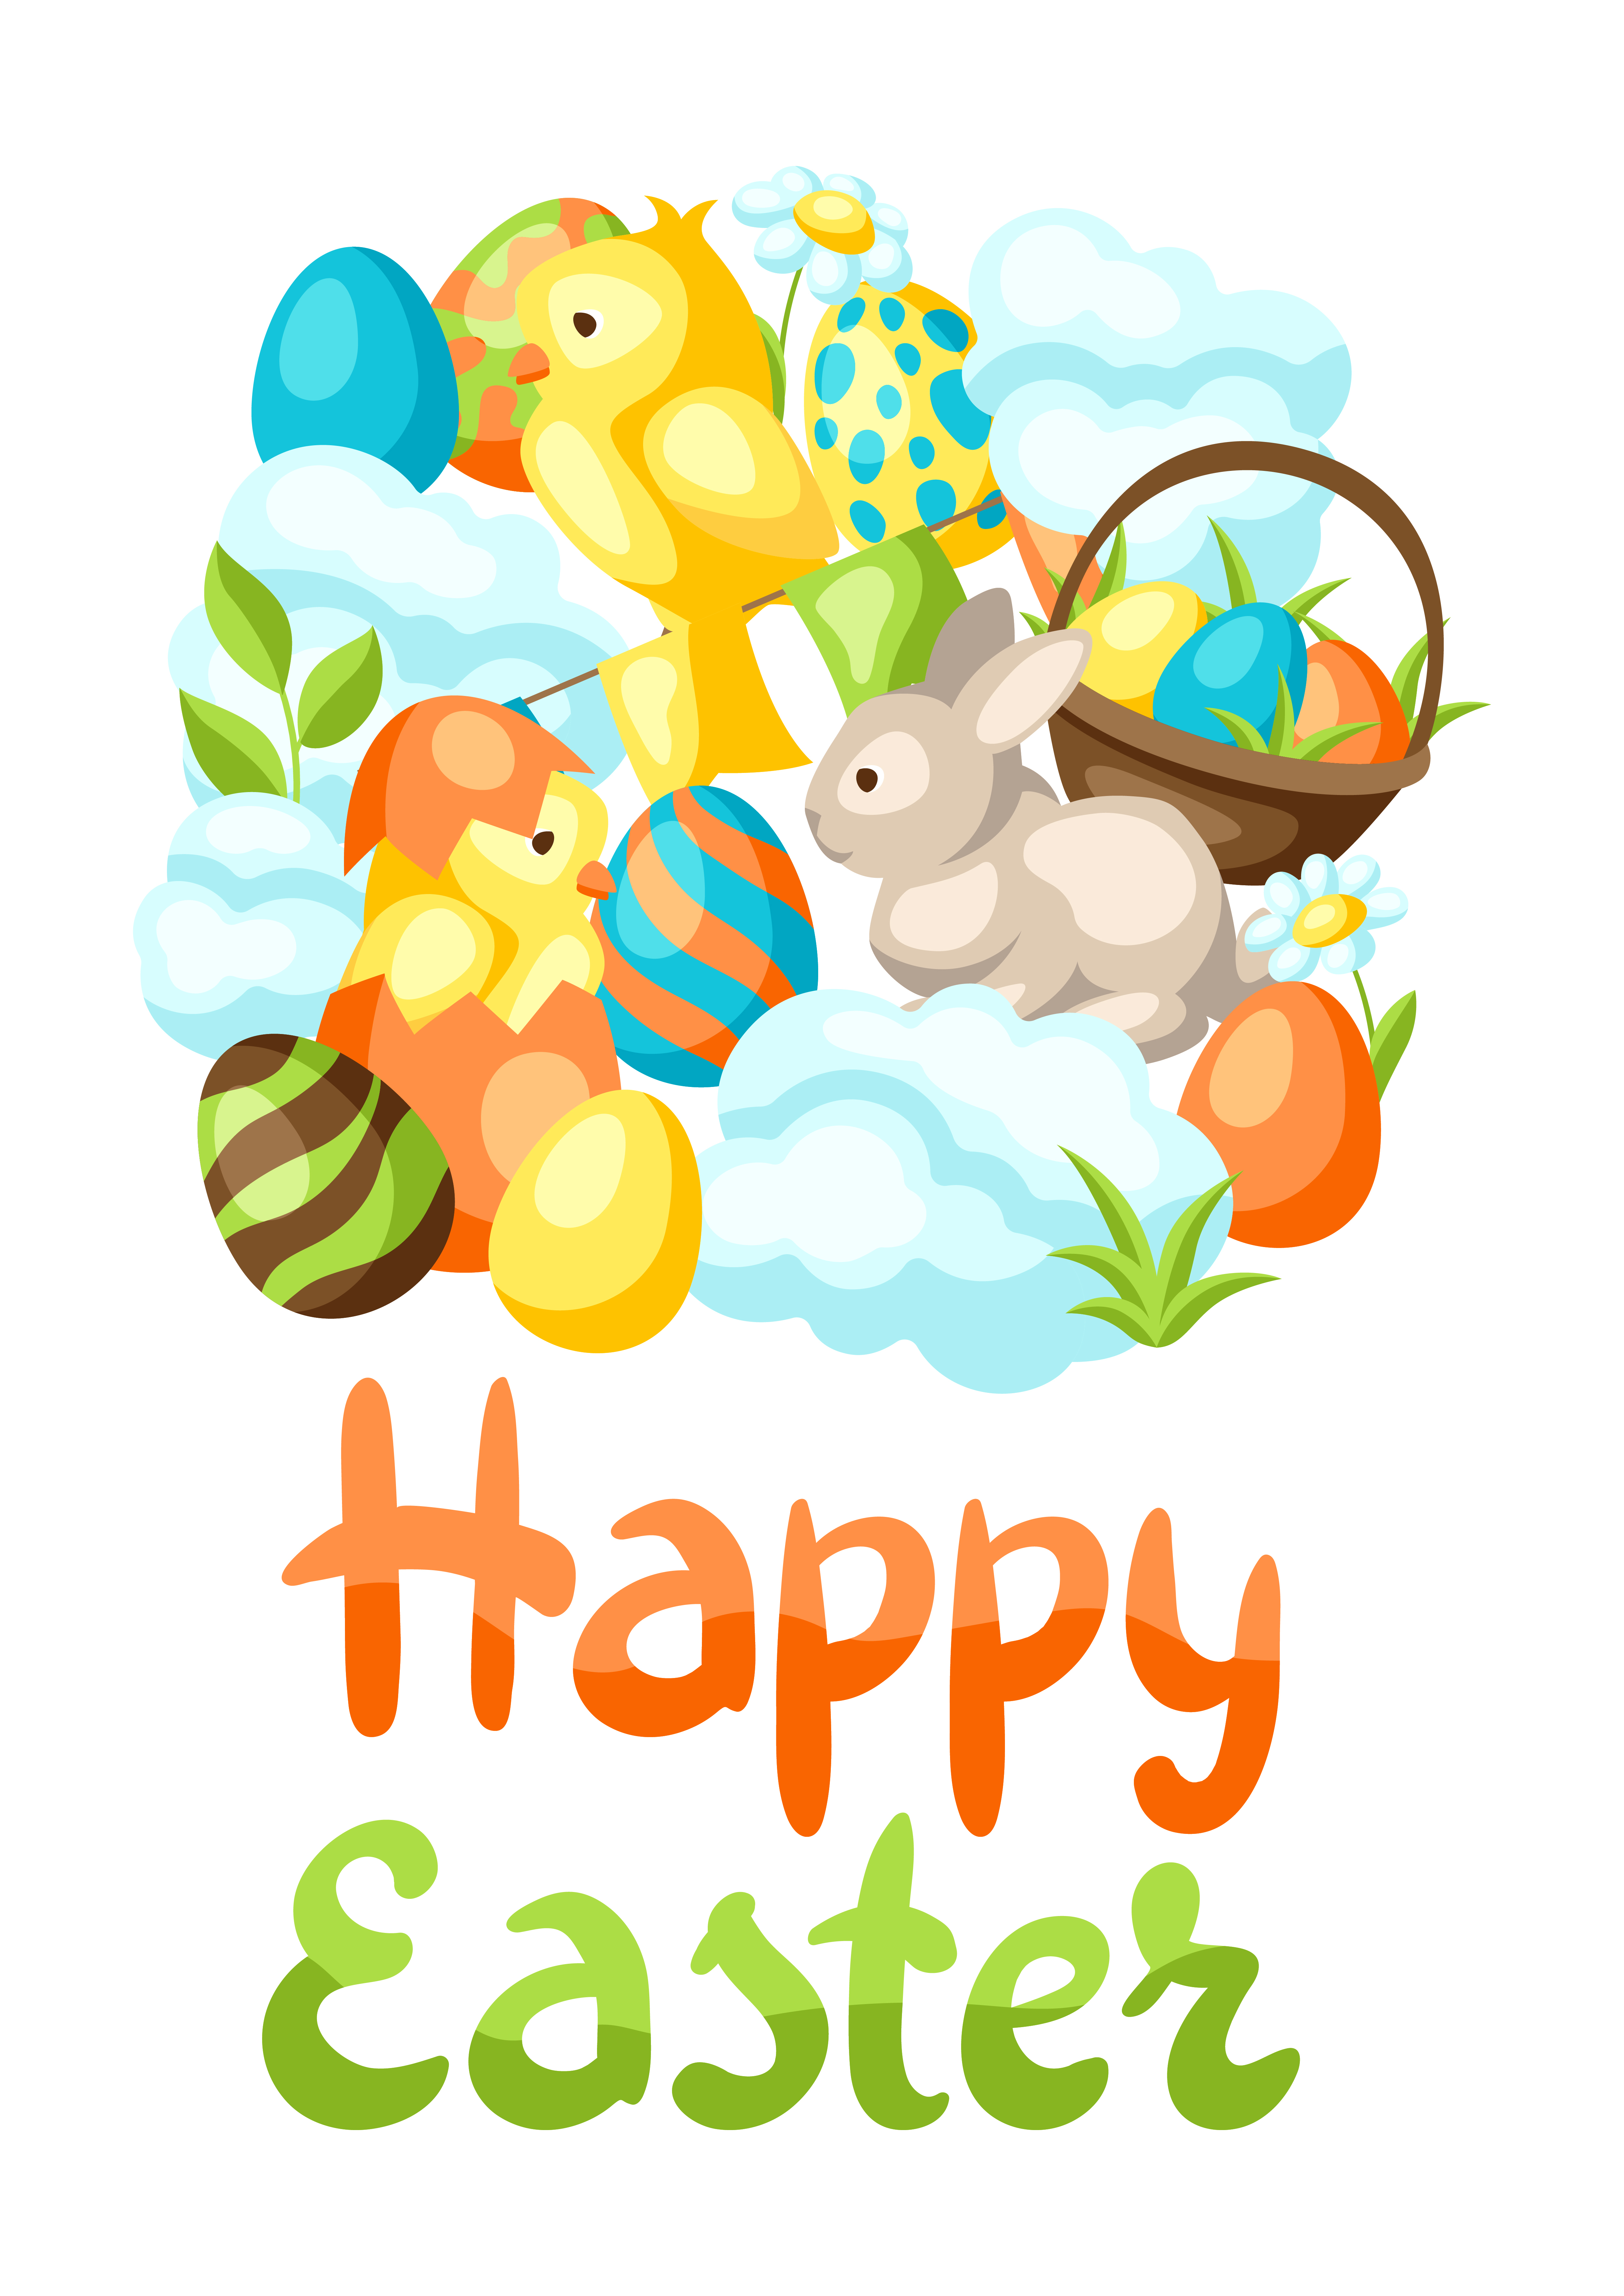 Happy Easter greeting card with holiday items. Decorative symbols and objects.. Happy Easter greeting card with holiday items.